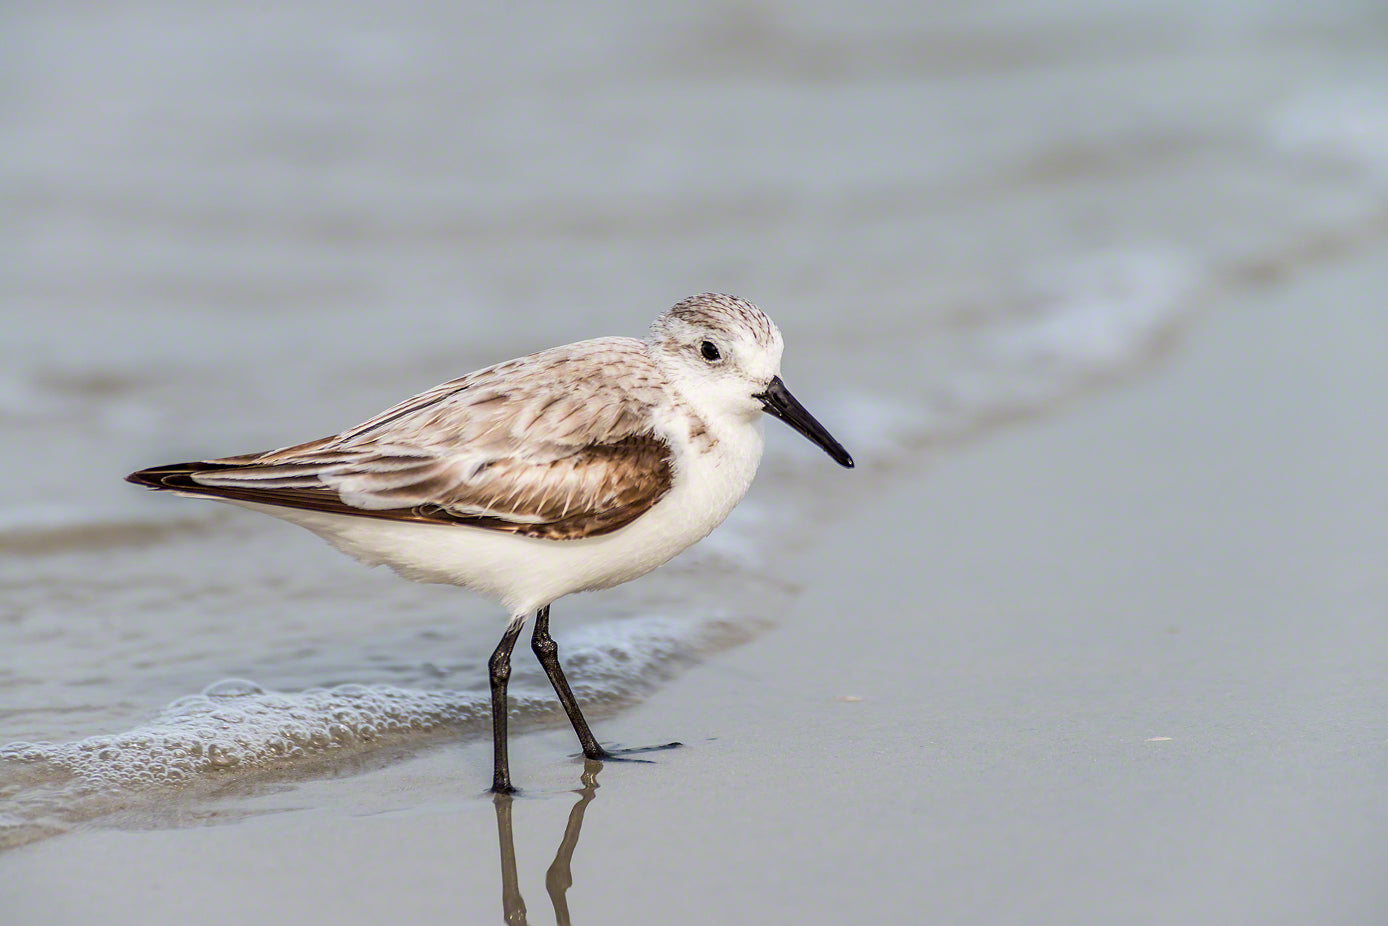 A photo of a sanderling sandpiper on the beach